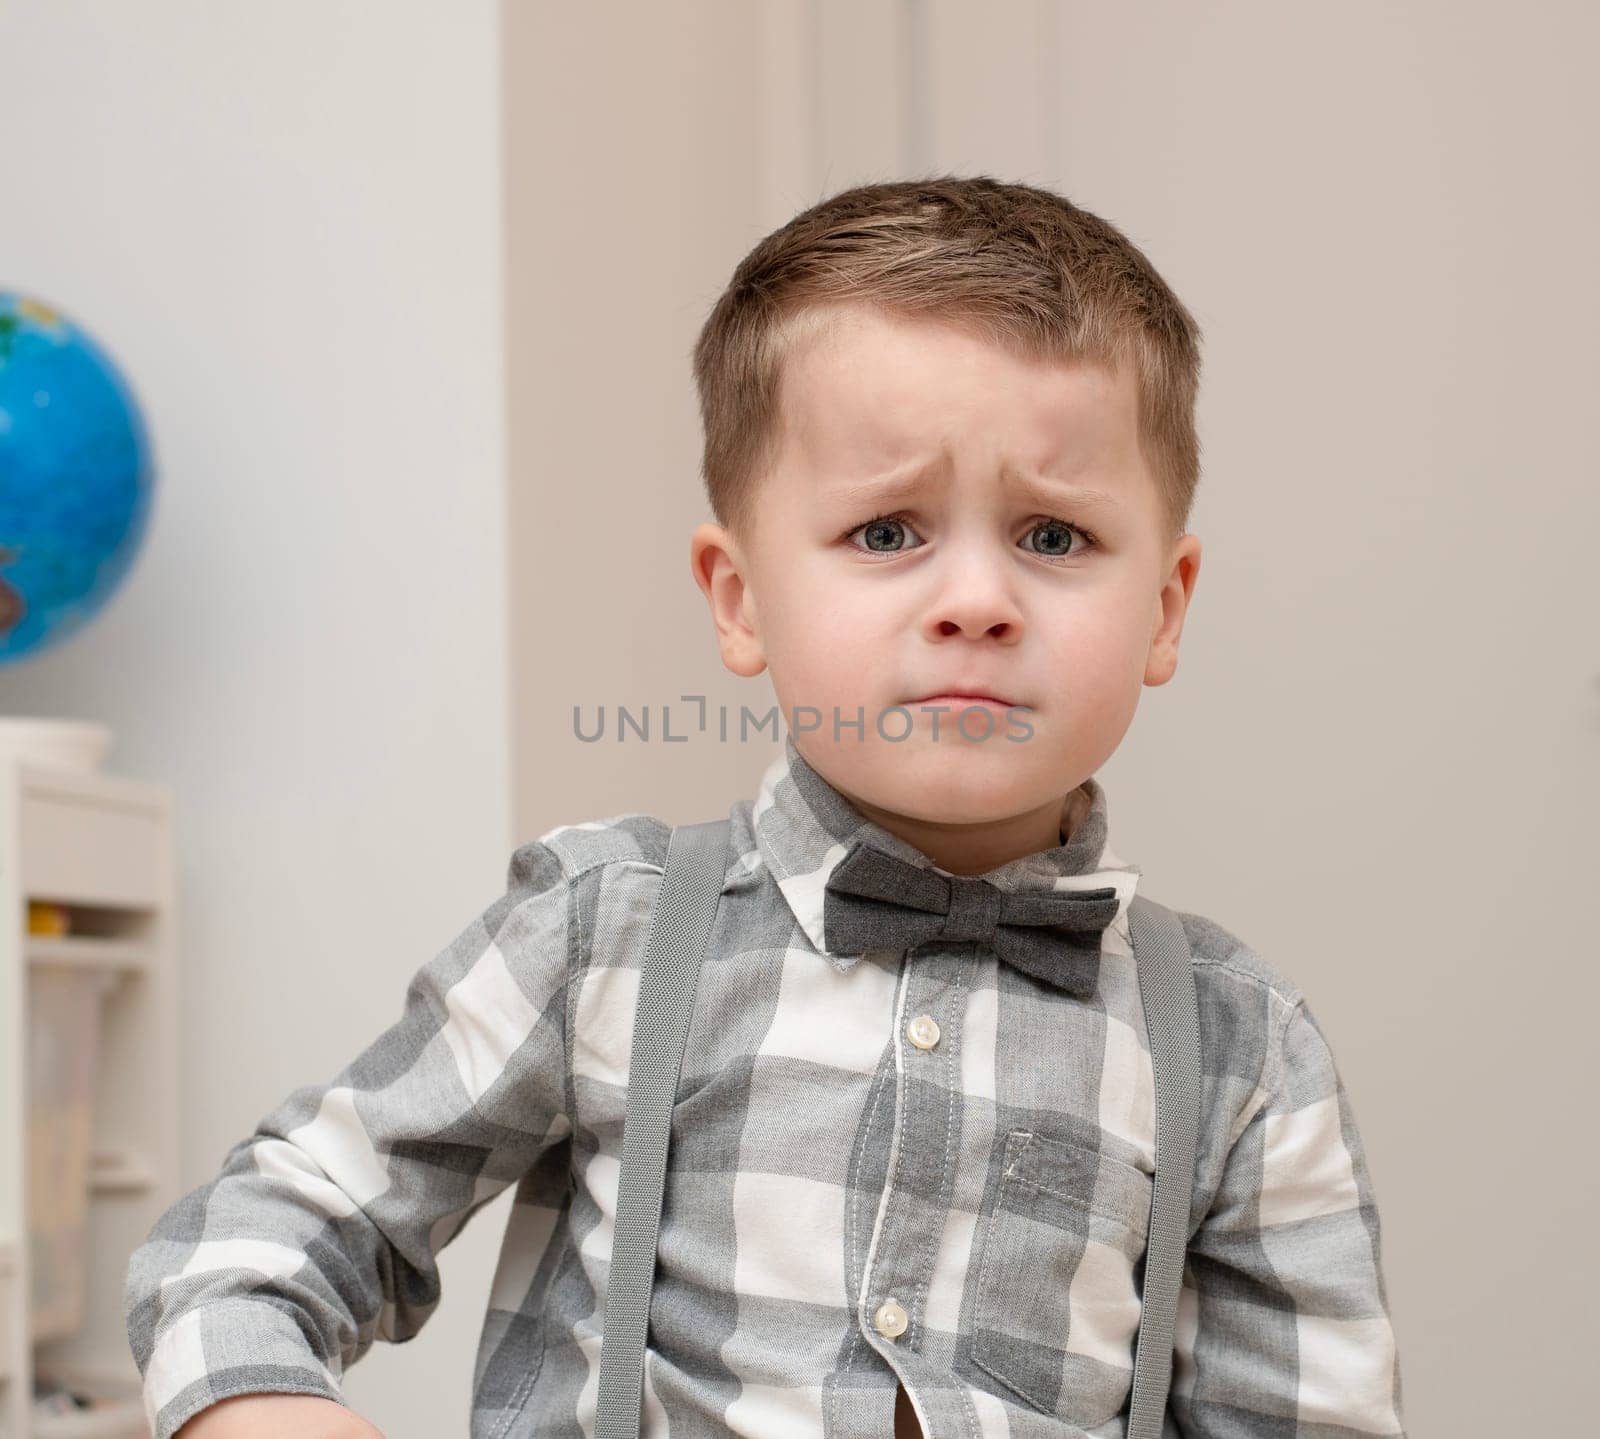 Emotions of sadness, resentment, sadness on the child s face. A small handsome boy of 4 years old in a shirt with a bow tie shows facial expressions. by ketlit